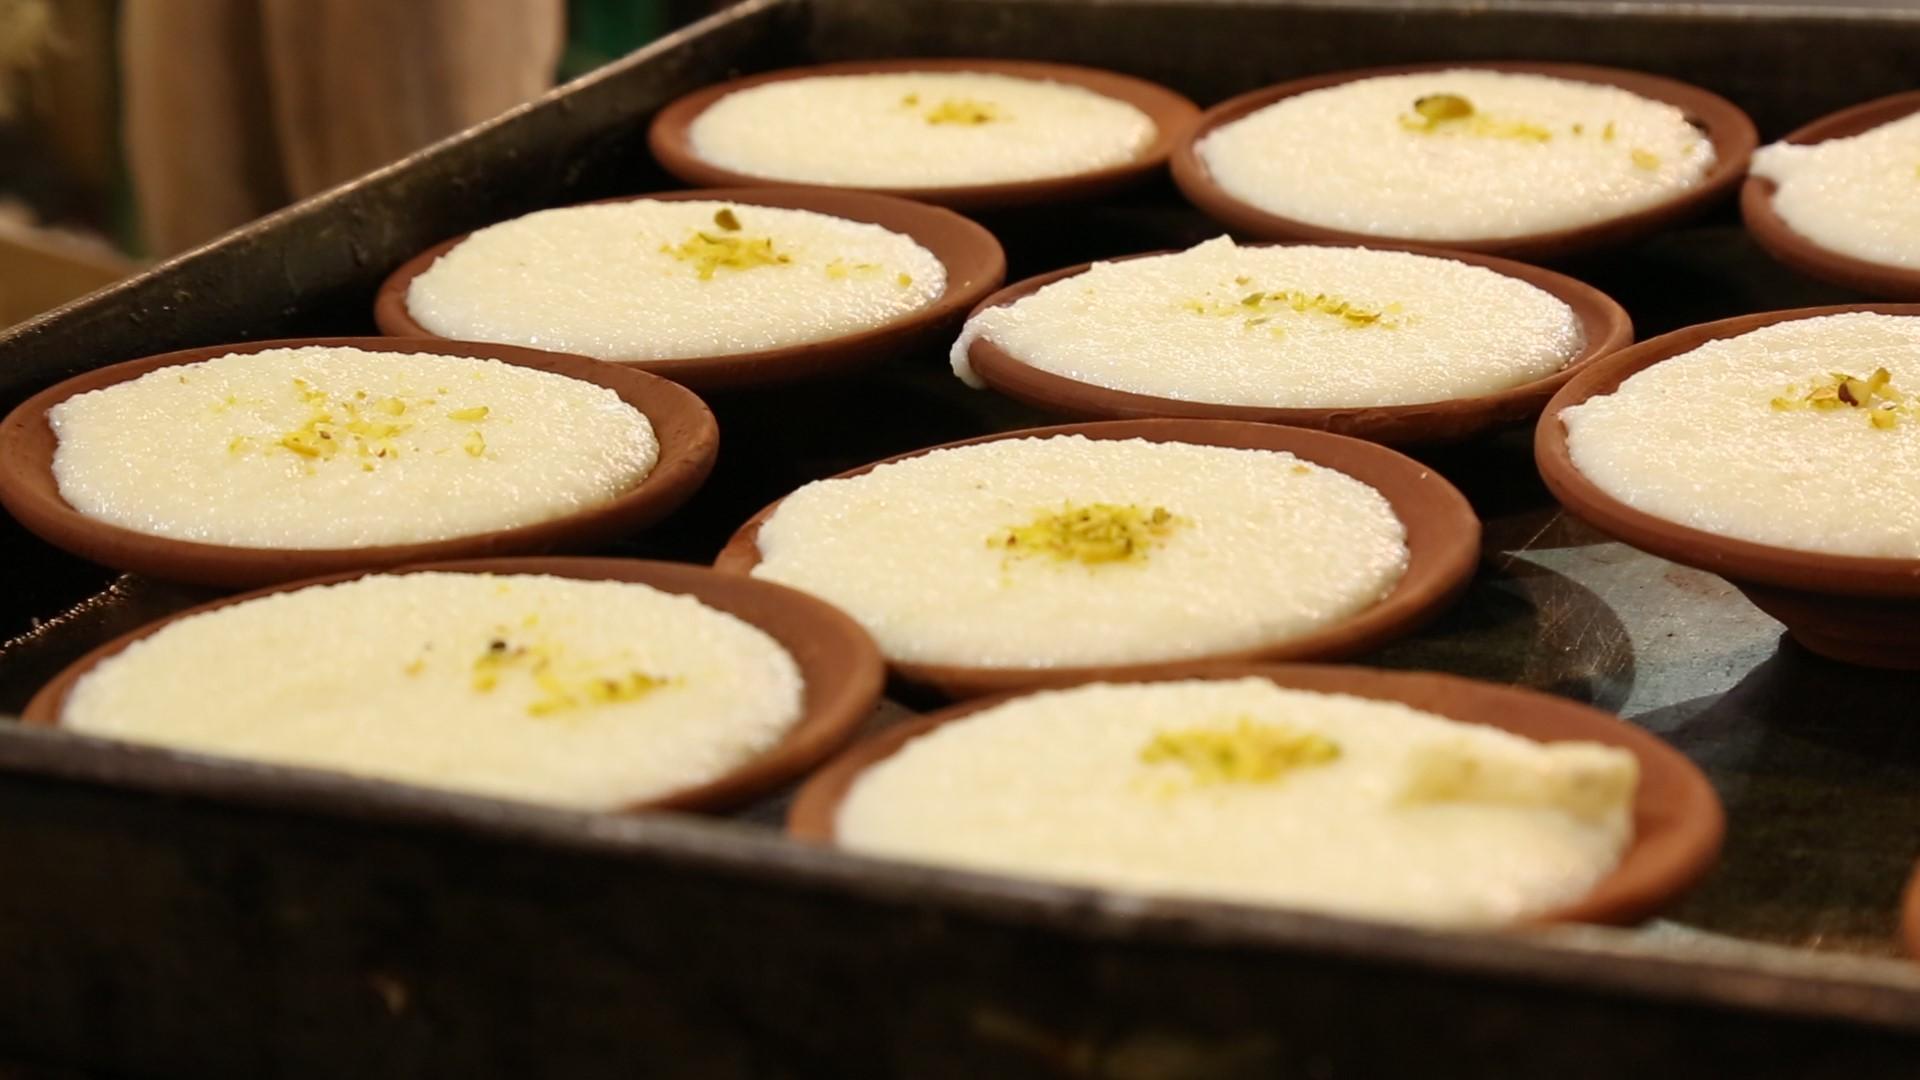 Firni at Modern Sweets: Enjoy the creamy delight of firni, a classic Indian rice pudding infused with fragrant cardamom and garnished with nuts at another celebrated sweet shop at Mohammad Ali Road: Modern Sweets (Rs 50 per cup)